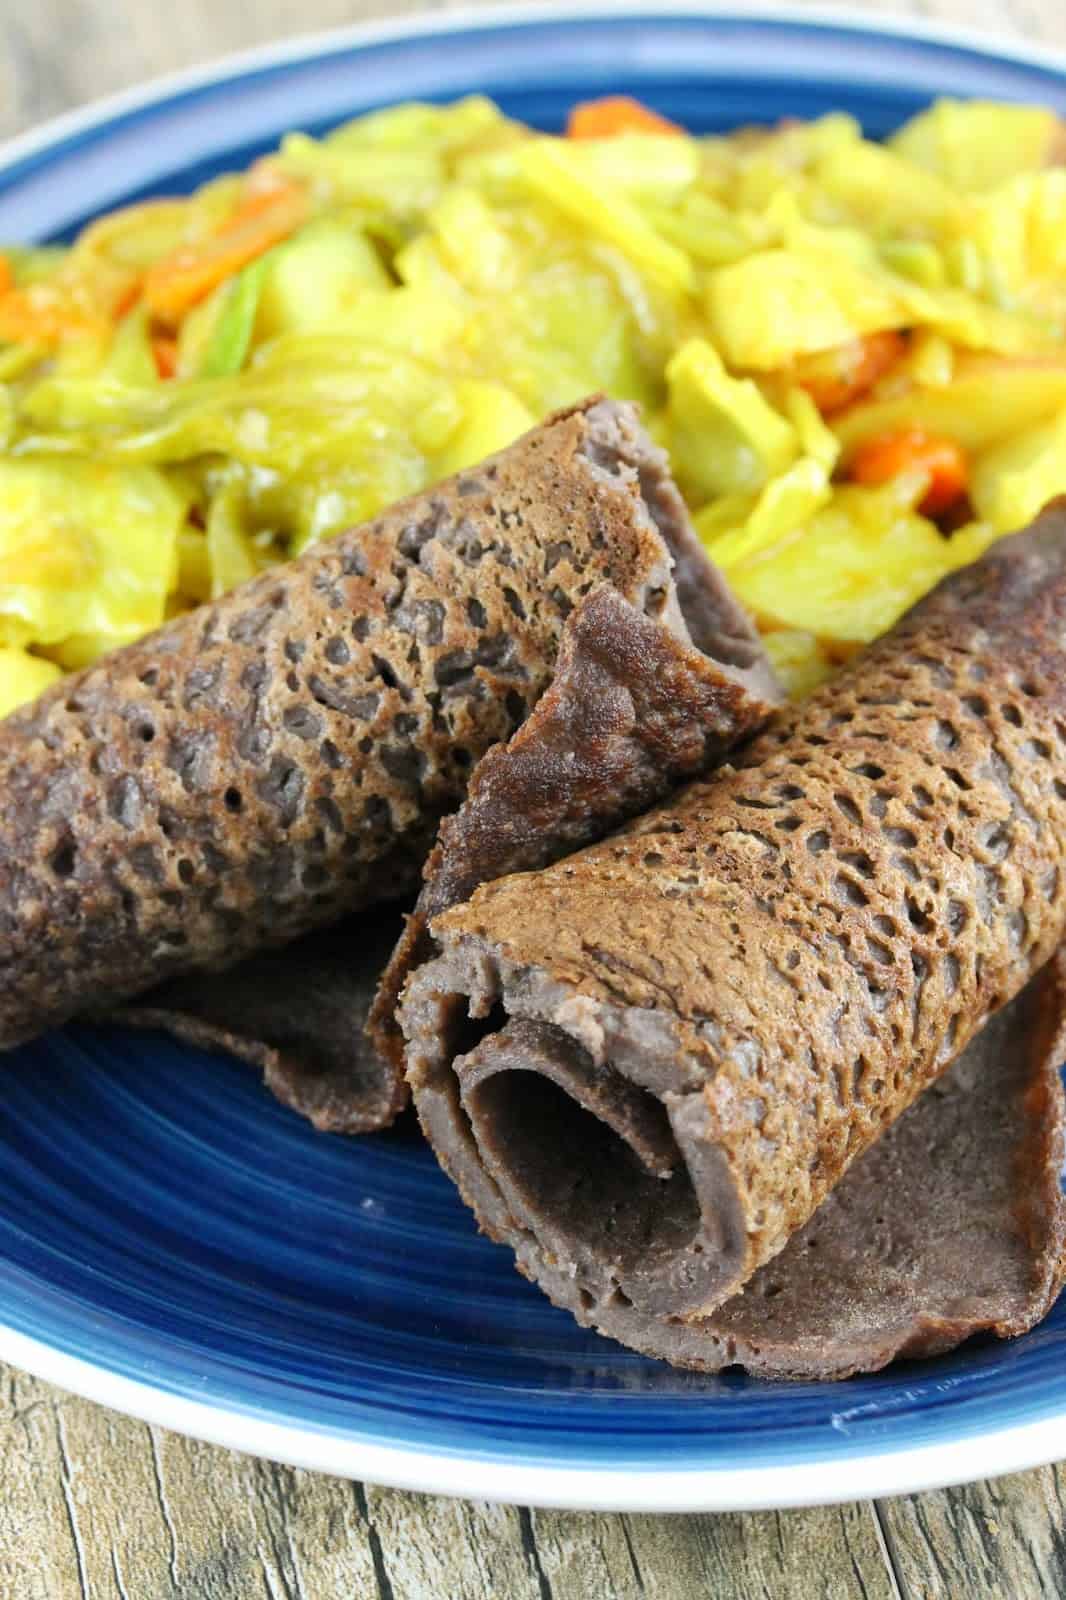 Ethiopian Injera Flat Bread is a staple in Ethiopian cuisine. A simple, unleavened bread made with teff flour. Here is rolled and served with Tikel Gomen